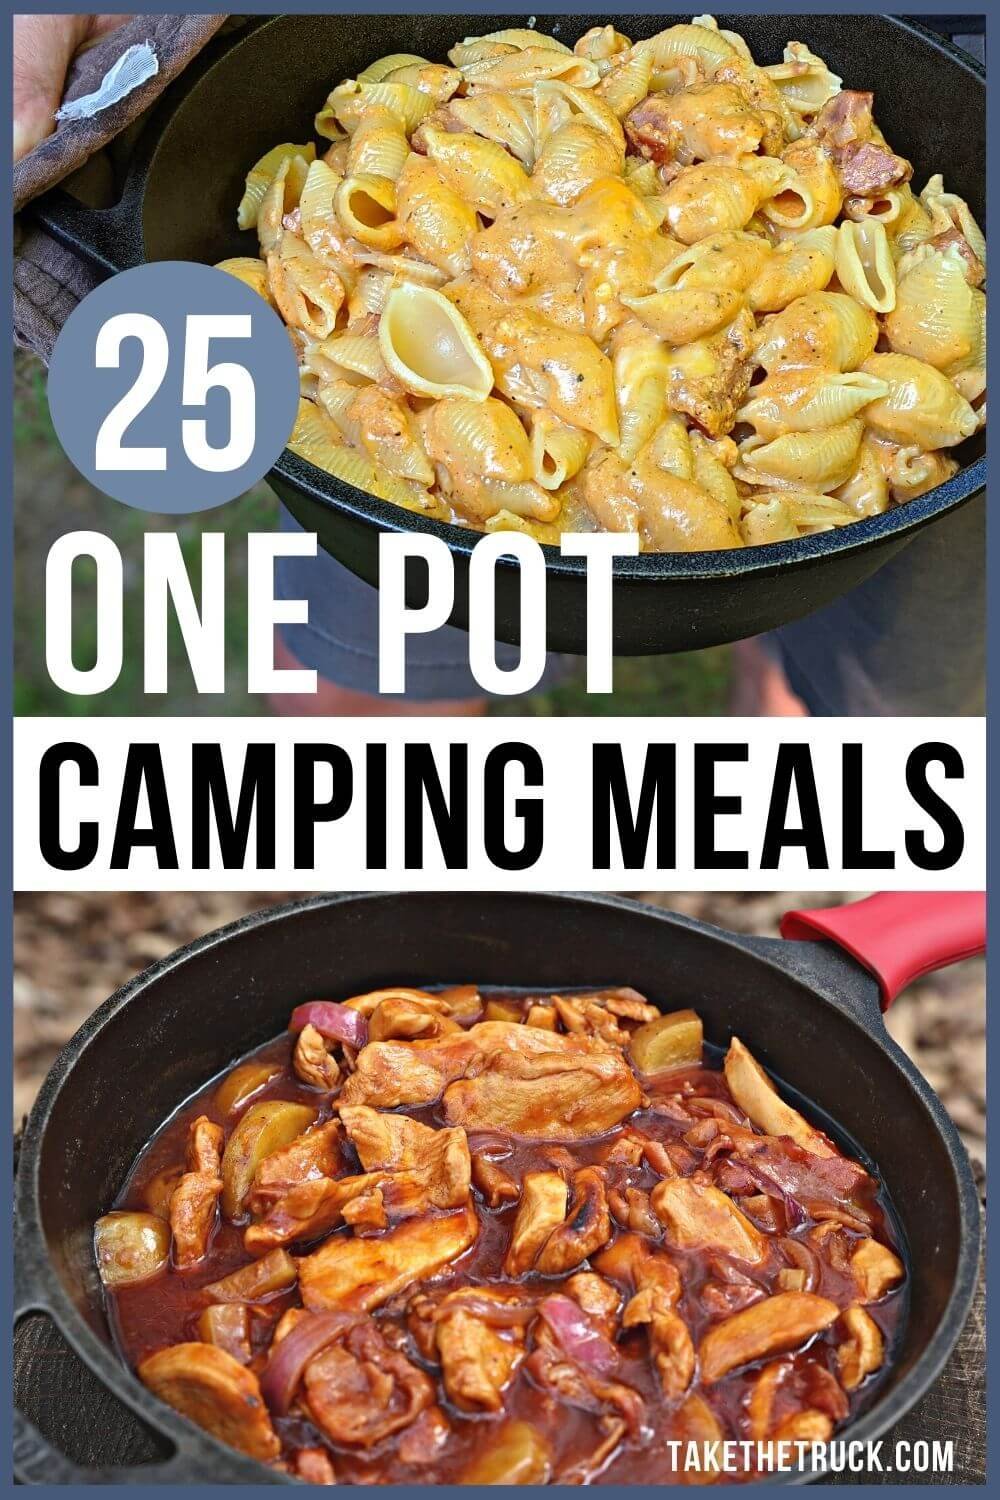 25 simple one pot camping meals for families. Extra one pot camping meal dinner ideas. Camping one pot meals free printable showing all the one pot camping recipes.